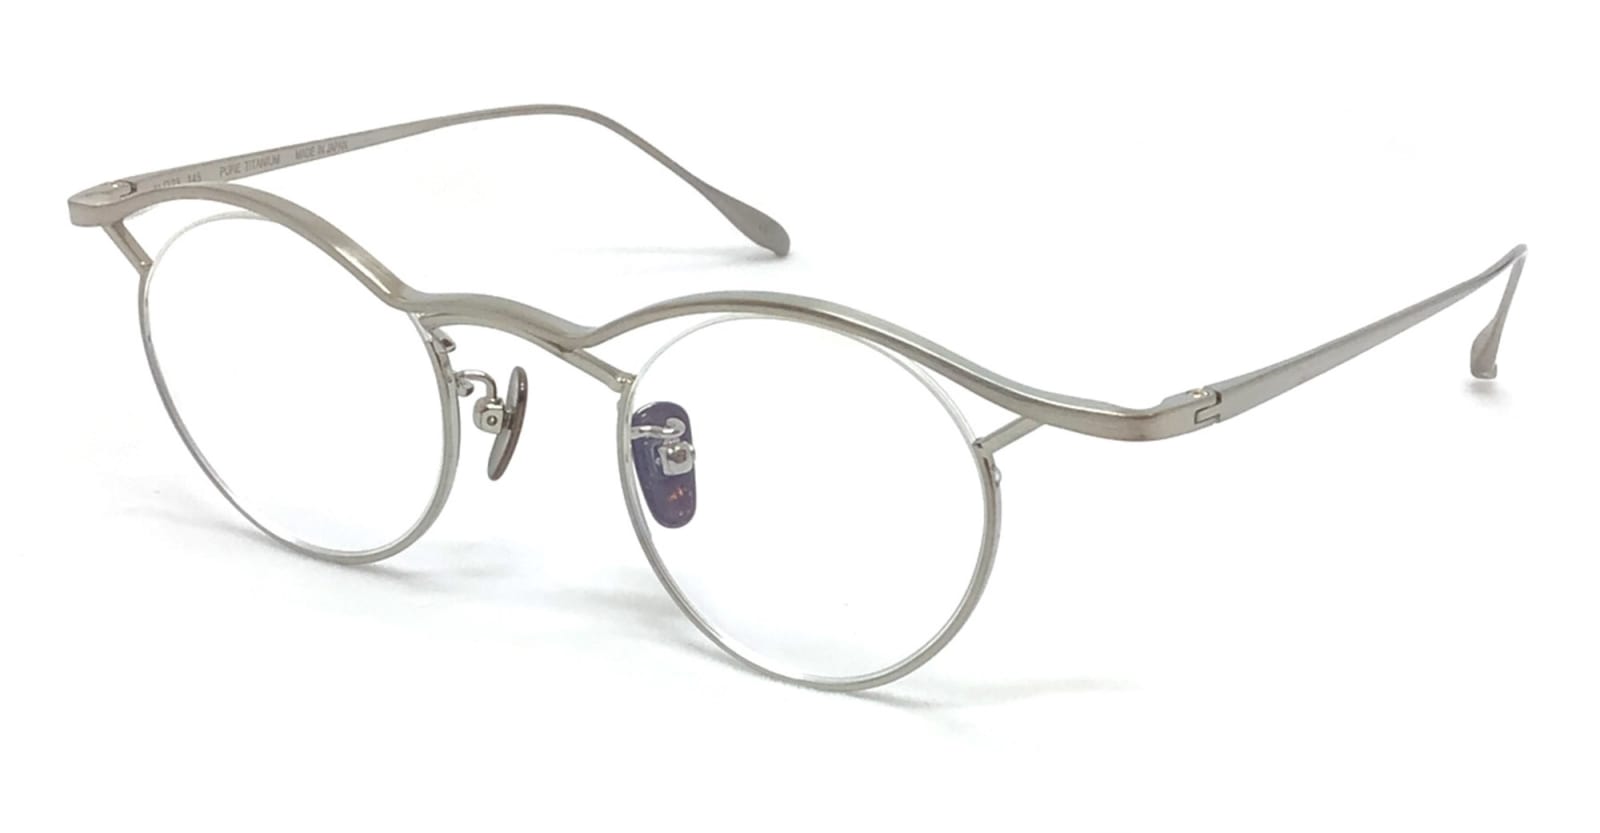 FACTORY900 Titanos X Factory900 Mf-001 - Silver Rx Glasses